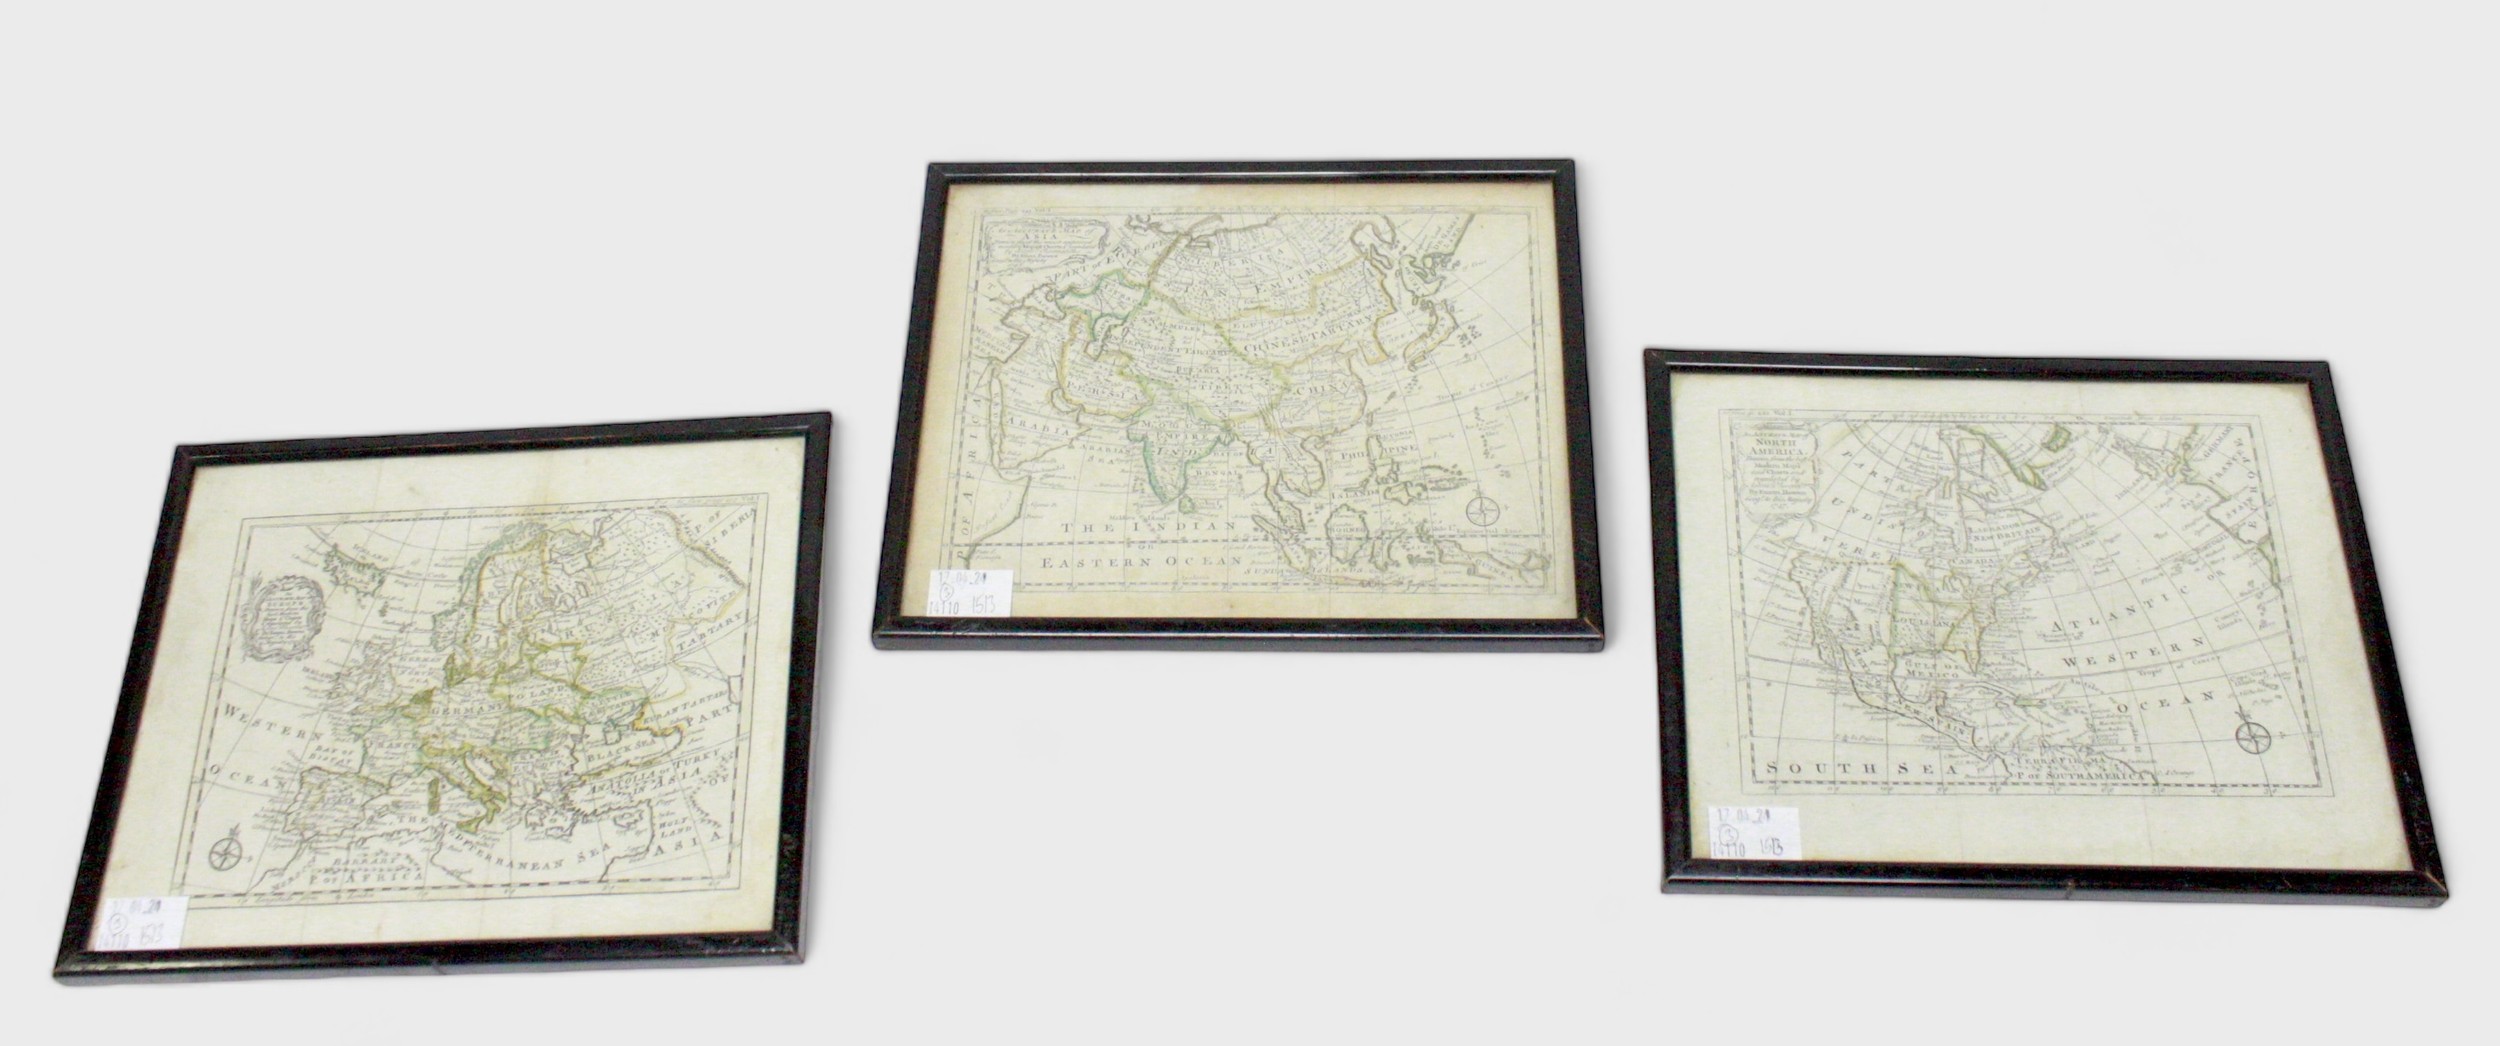 Emanuel Bowen (1694-1767), three hand-coloured engraved maps of ‘Europe’, ‘North America’, and ‘